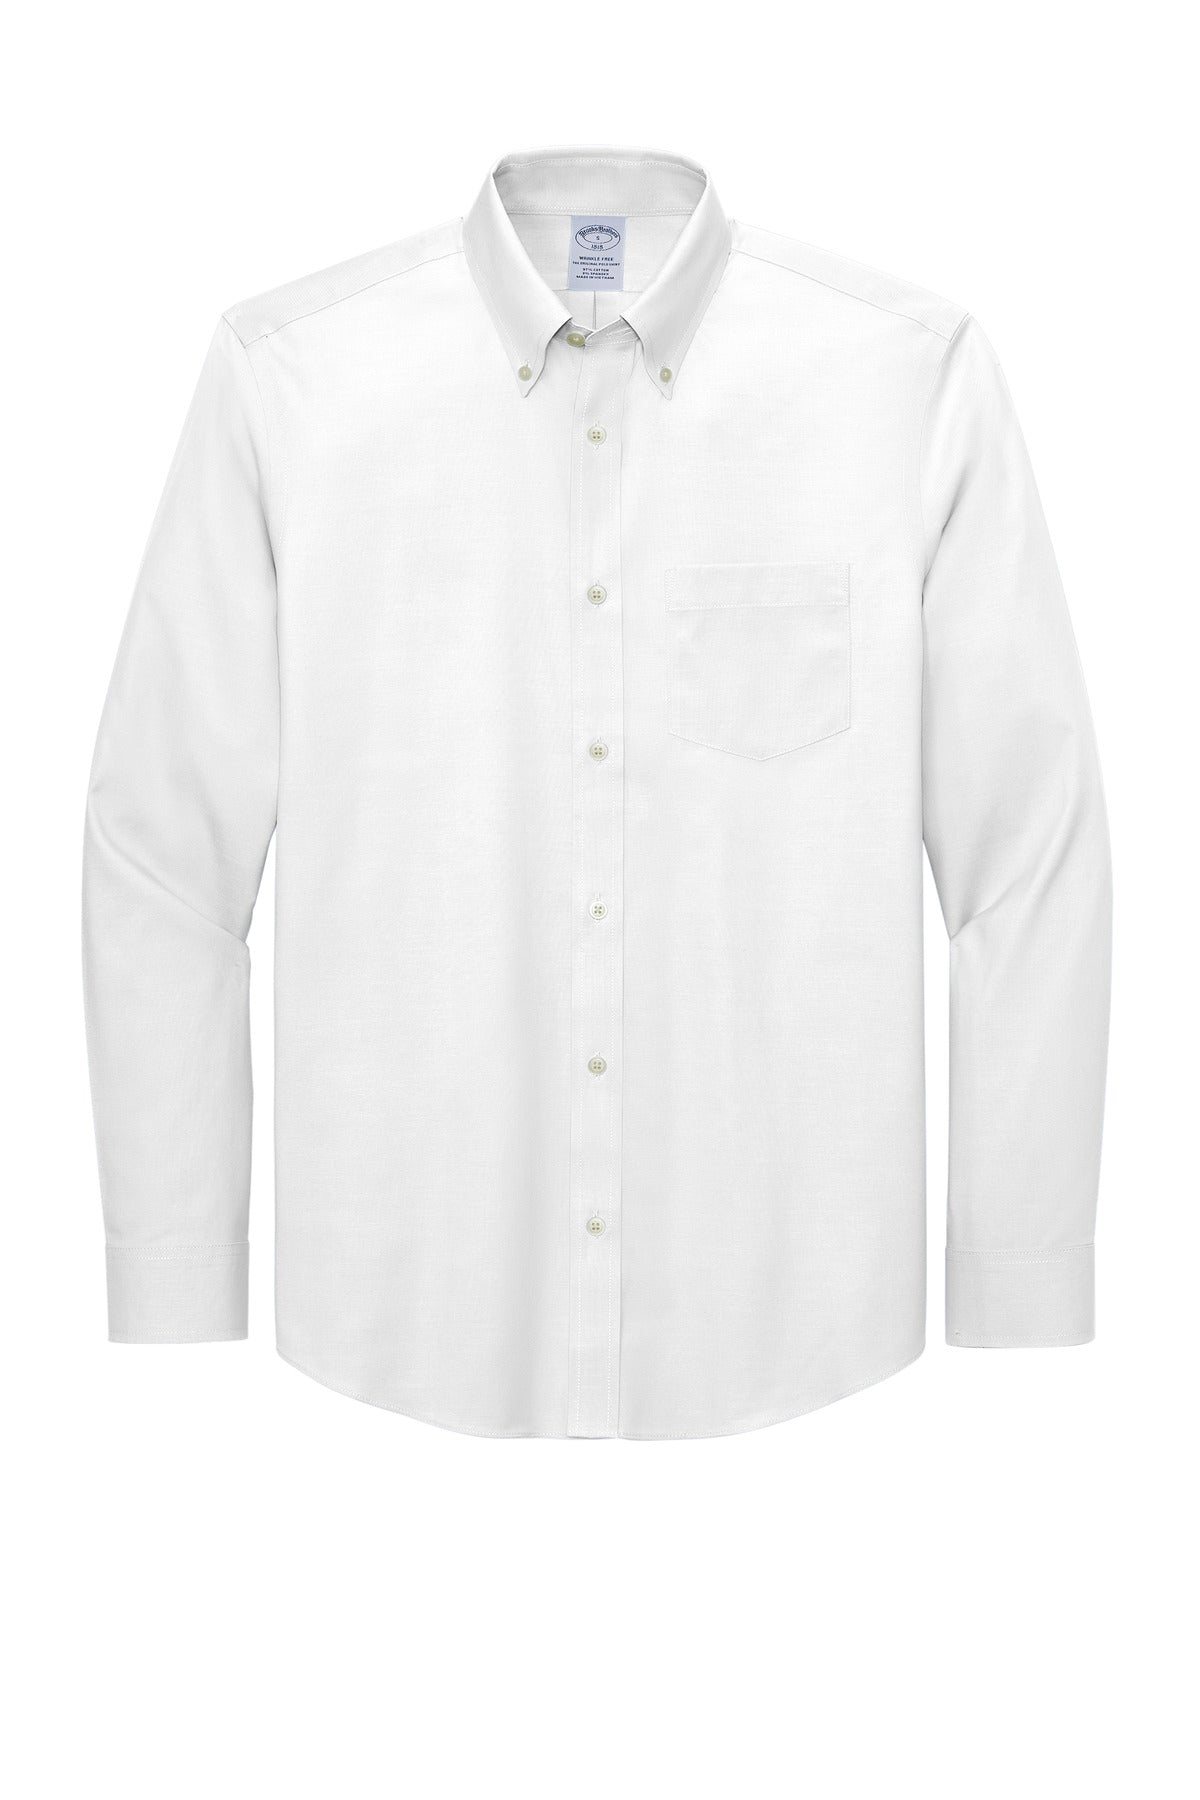 Brooks Brothers Wrinkle-Free Stretch Pinpoint Shirt BB18000